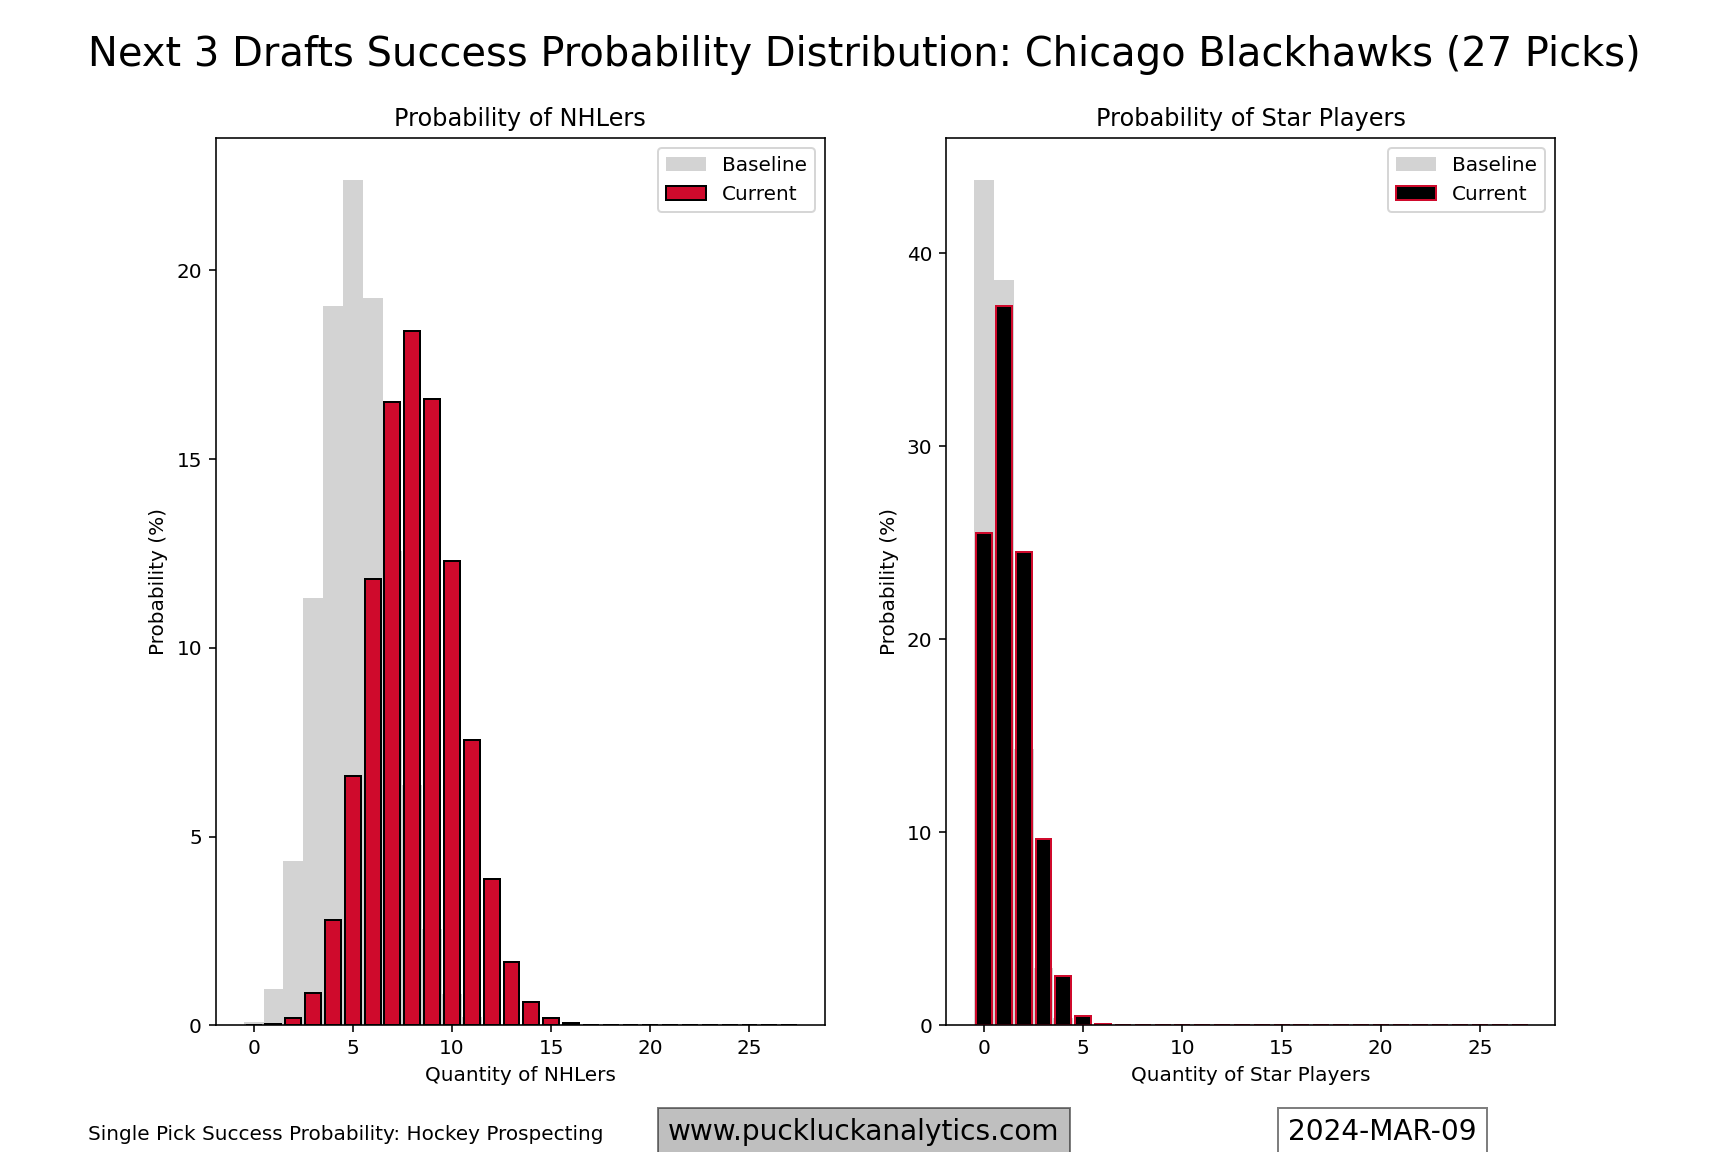 Chicago Blackhawks draft success probability for the next 3 drafts